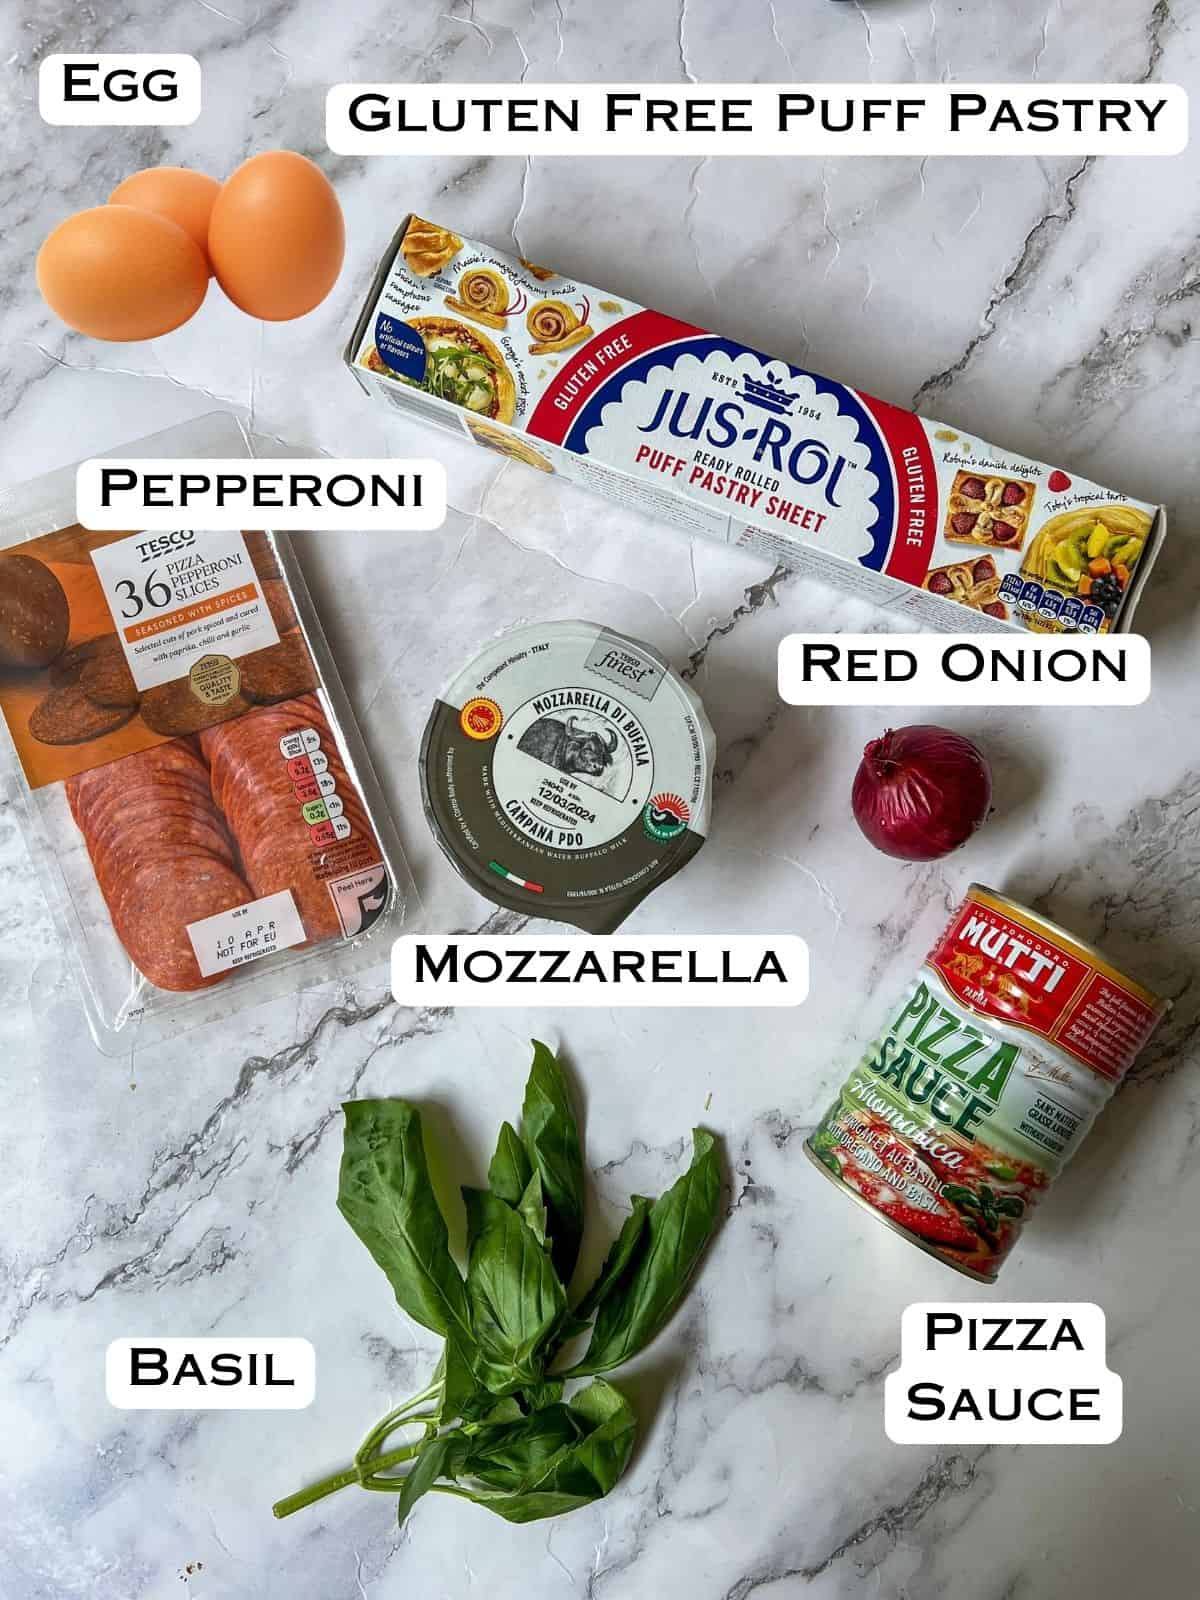 Ingredients laid out for gluten free puff pastry pizza.